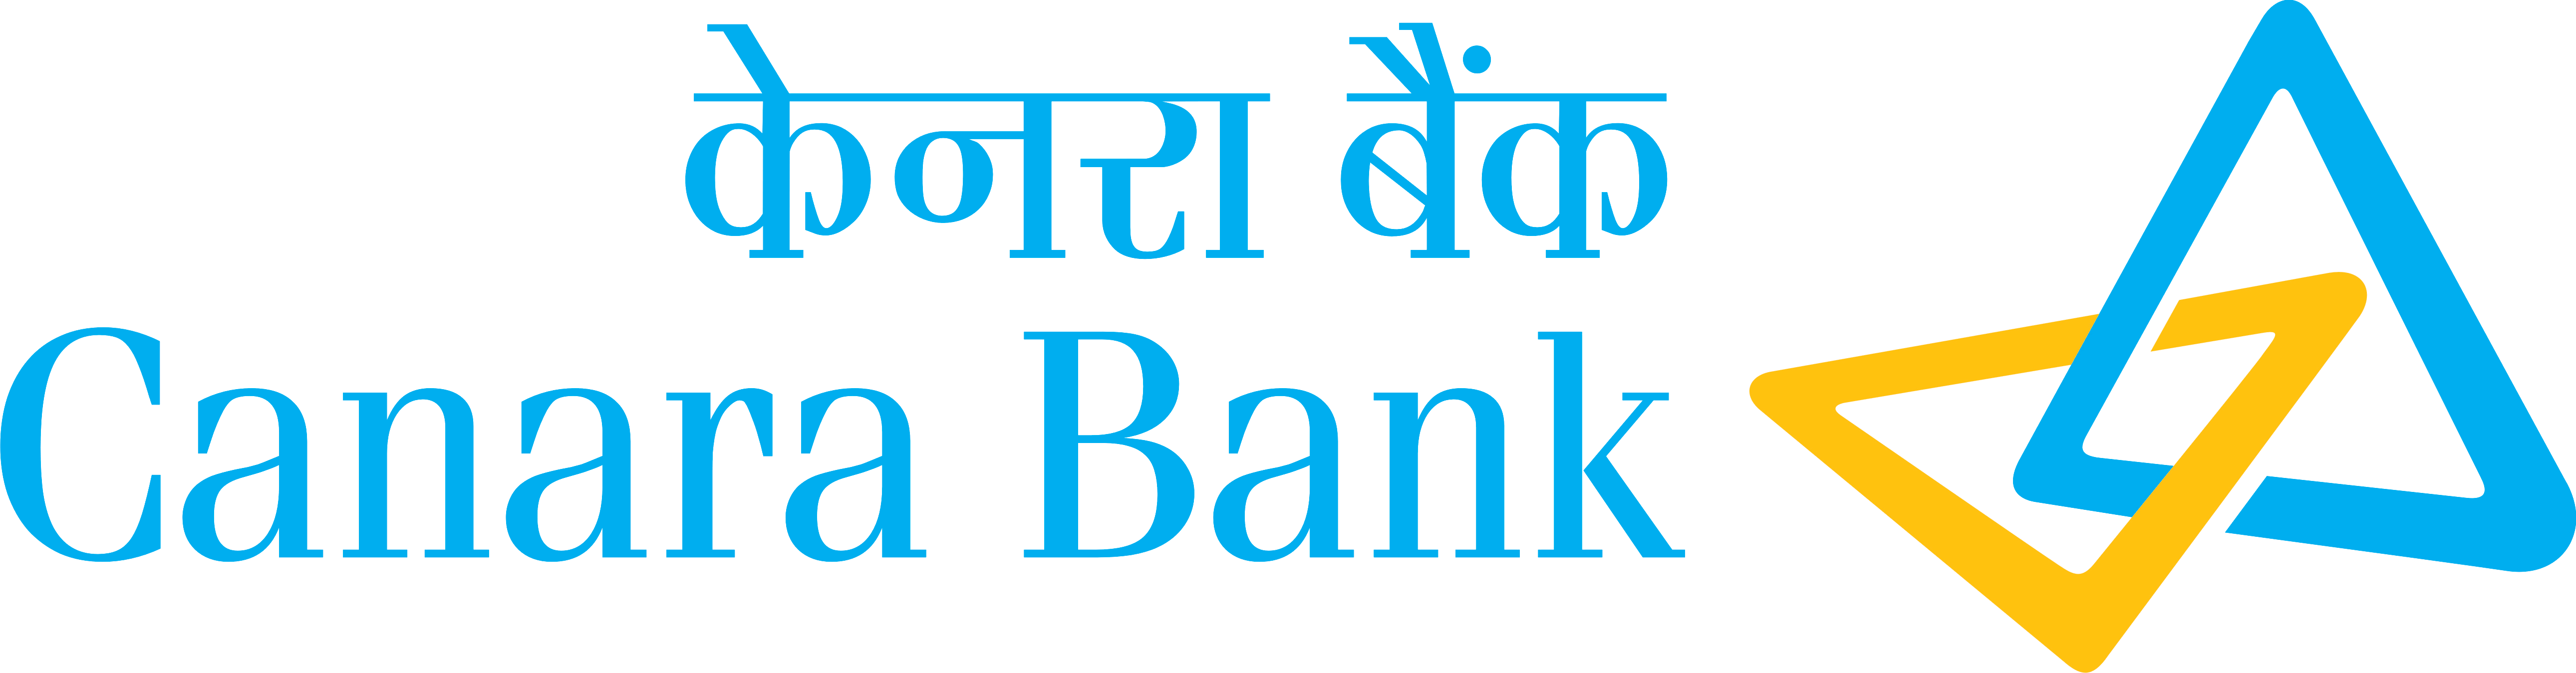 List Of National Banks In India With Logo Tag Line - Canara Bank Logo Png (5161x1349)